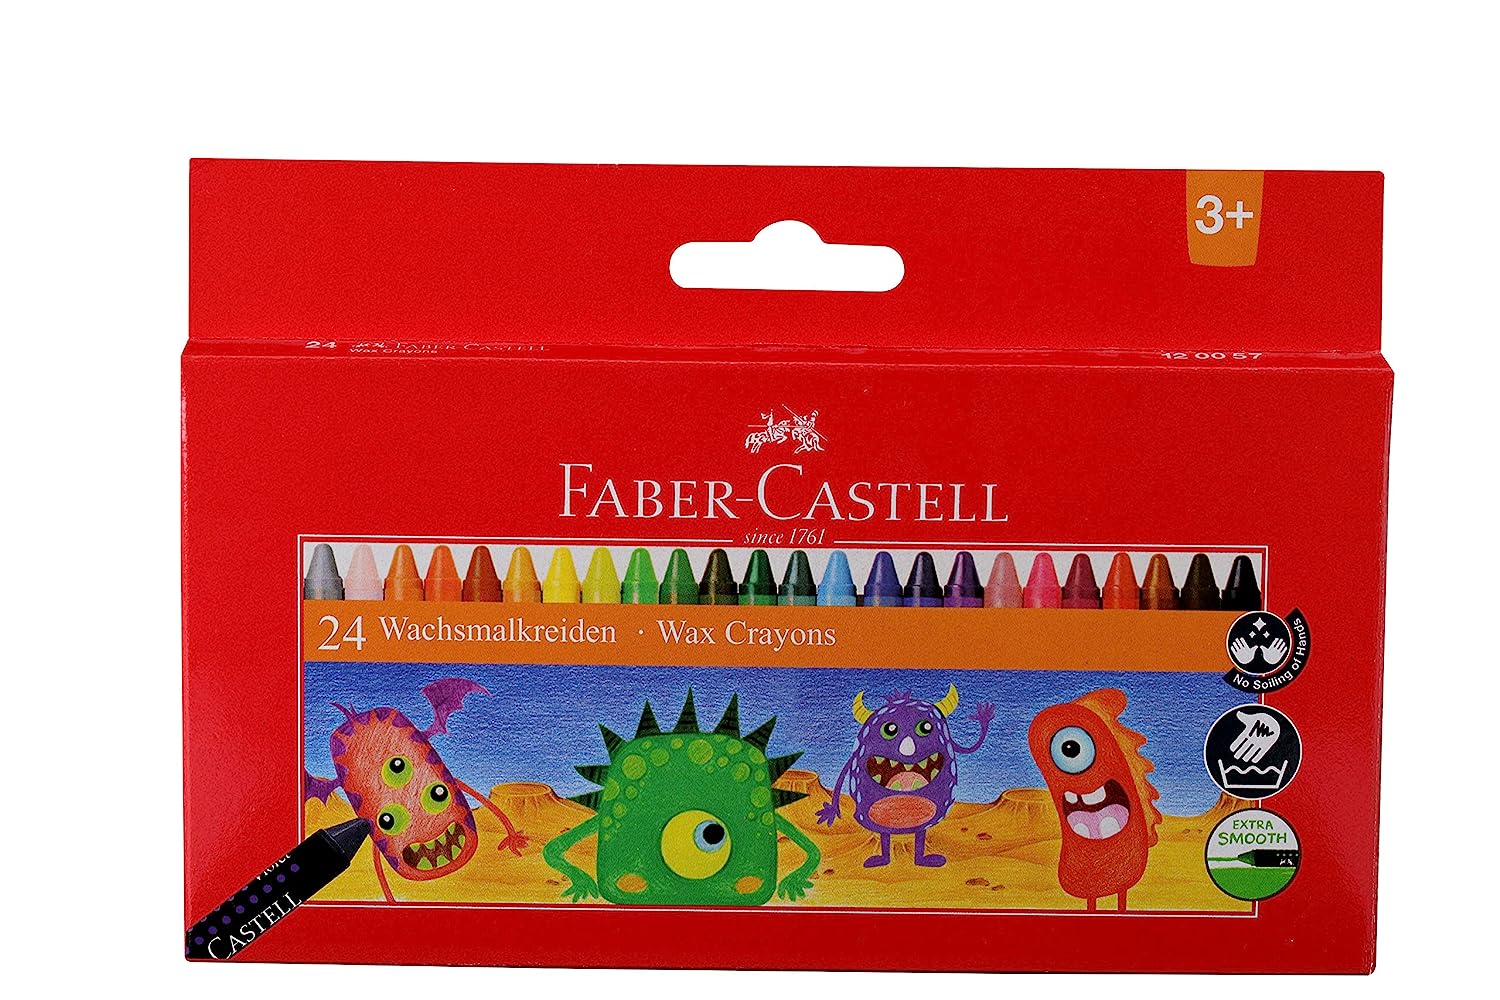 Faber-Castell Wax Crayon Set 75mm Pack of 24 Assorted Pack of 200